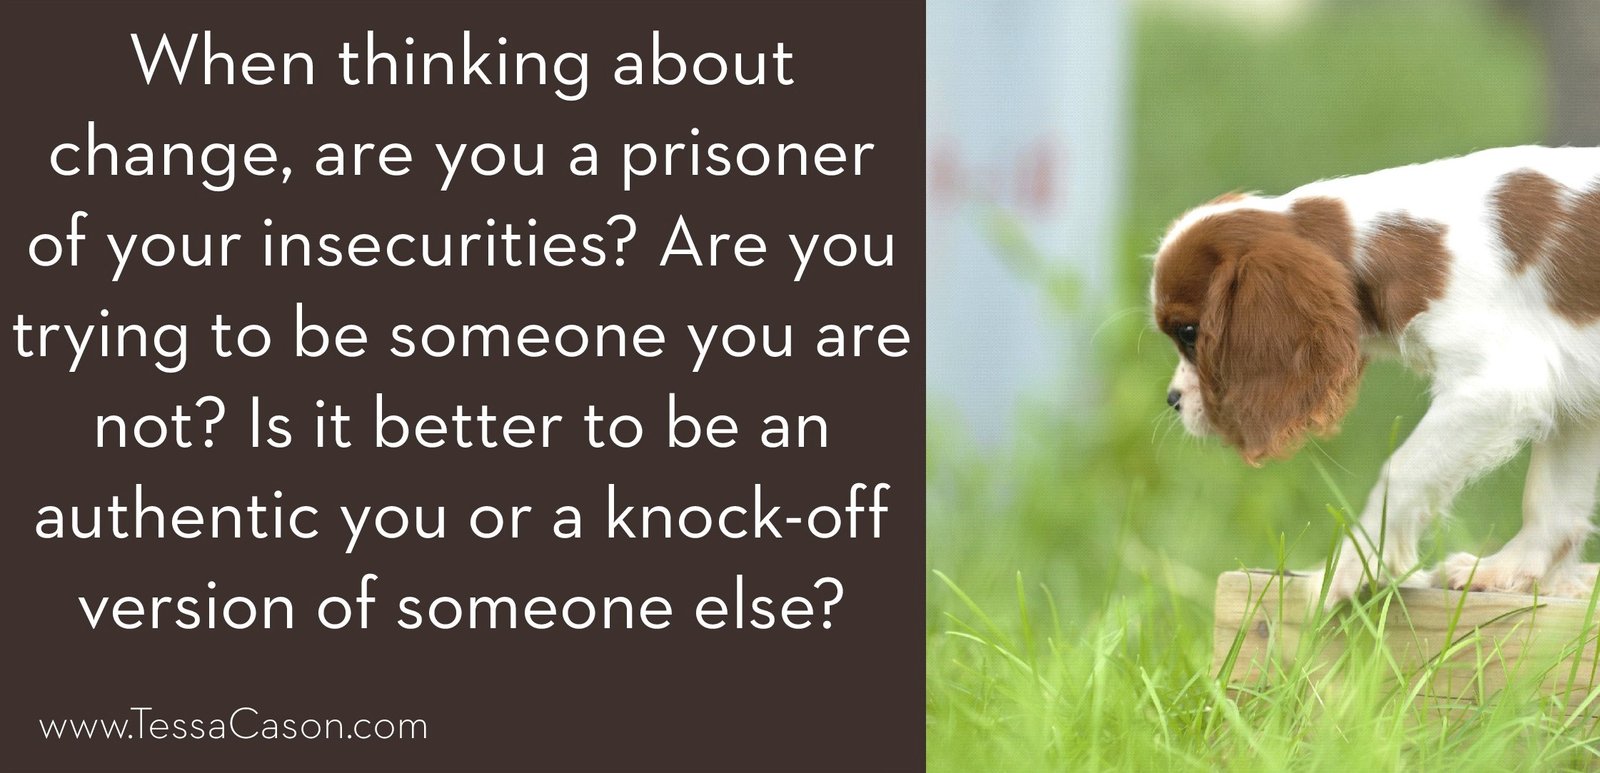 Are you a prisoner of your insecurities